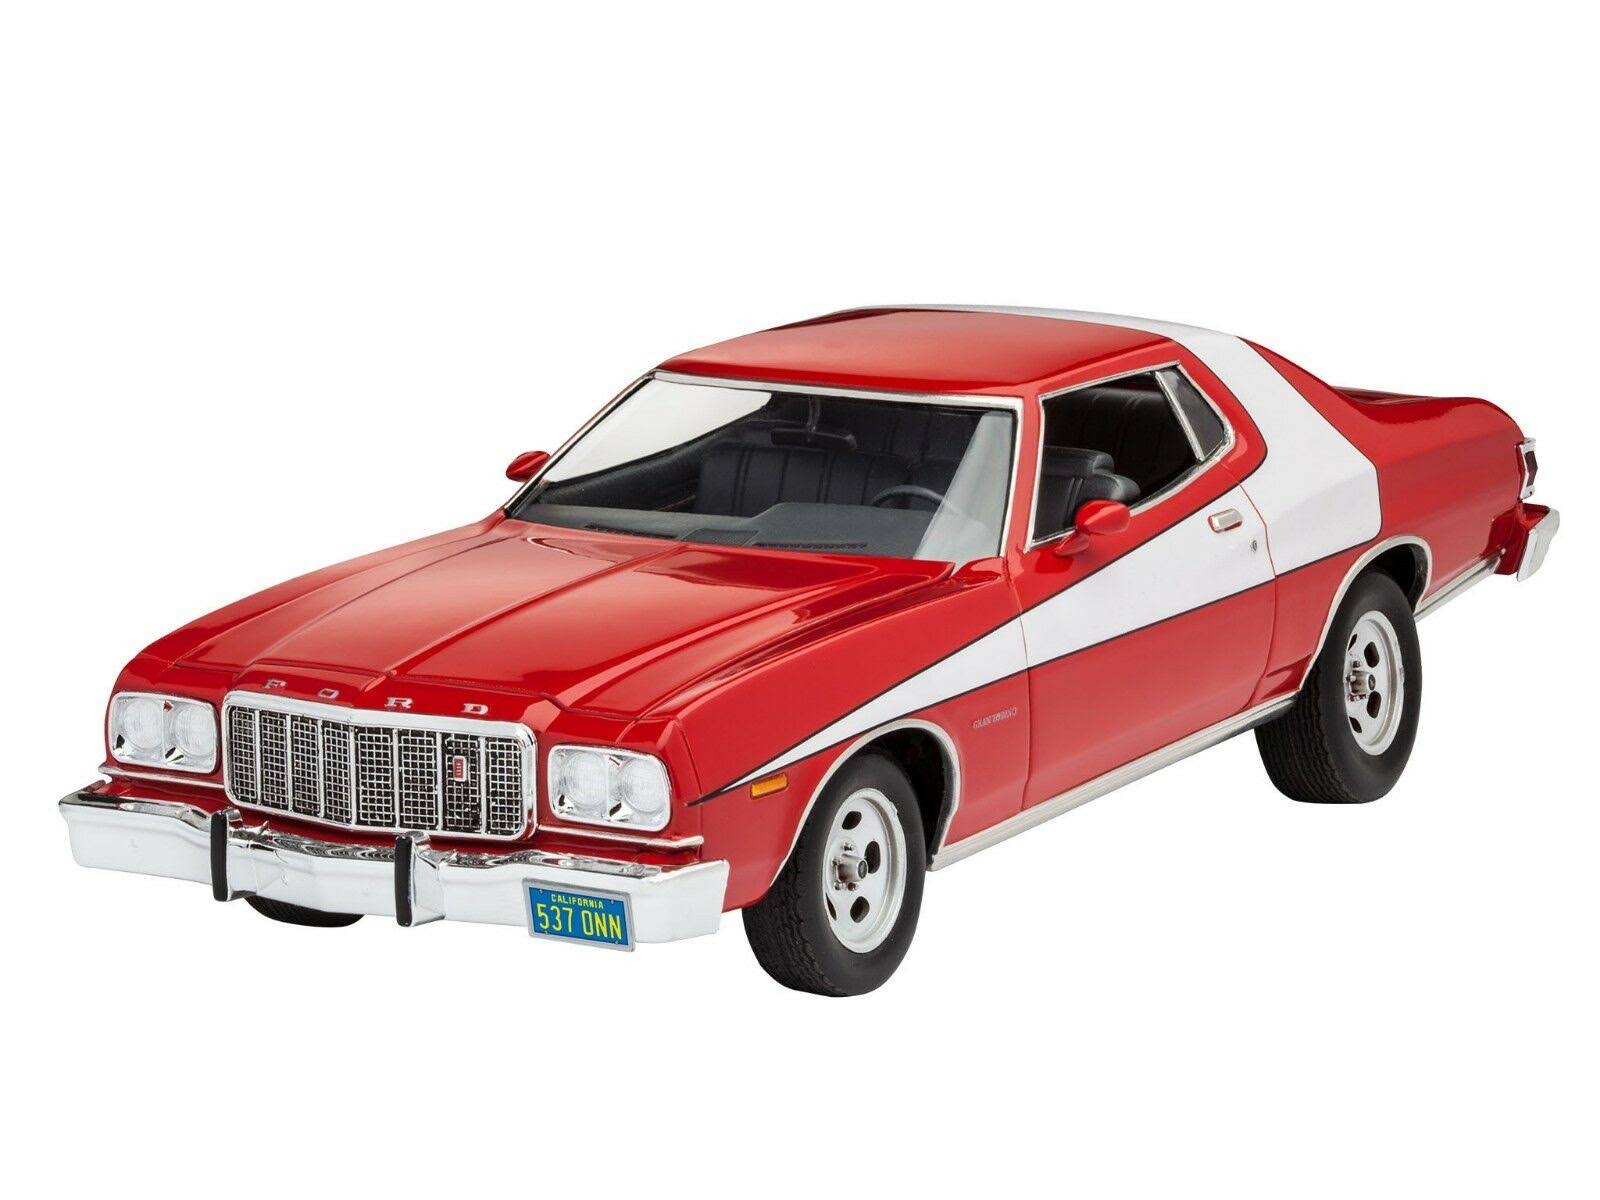 Revell 07038 Car Model Kit - 76' Ford Torino, Red and White, Scale 1:25